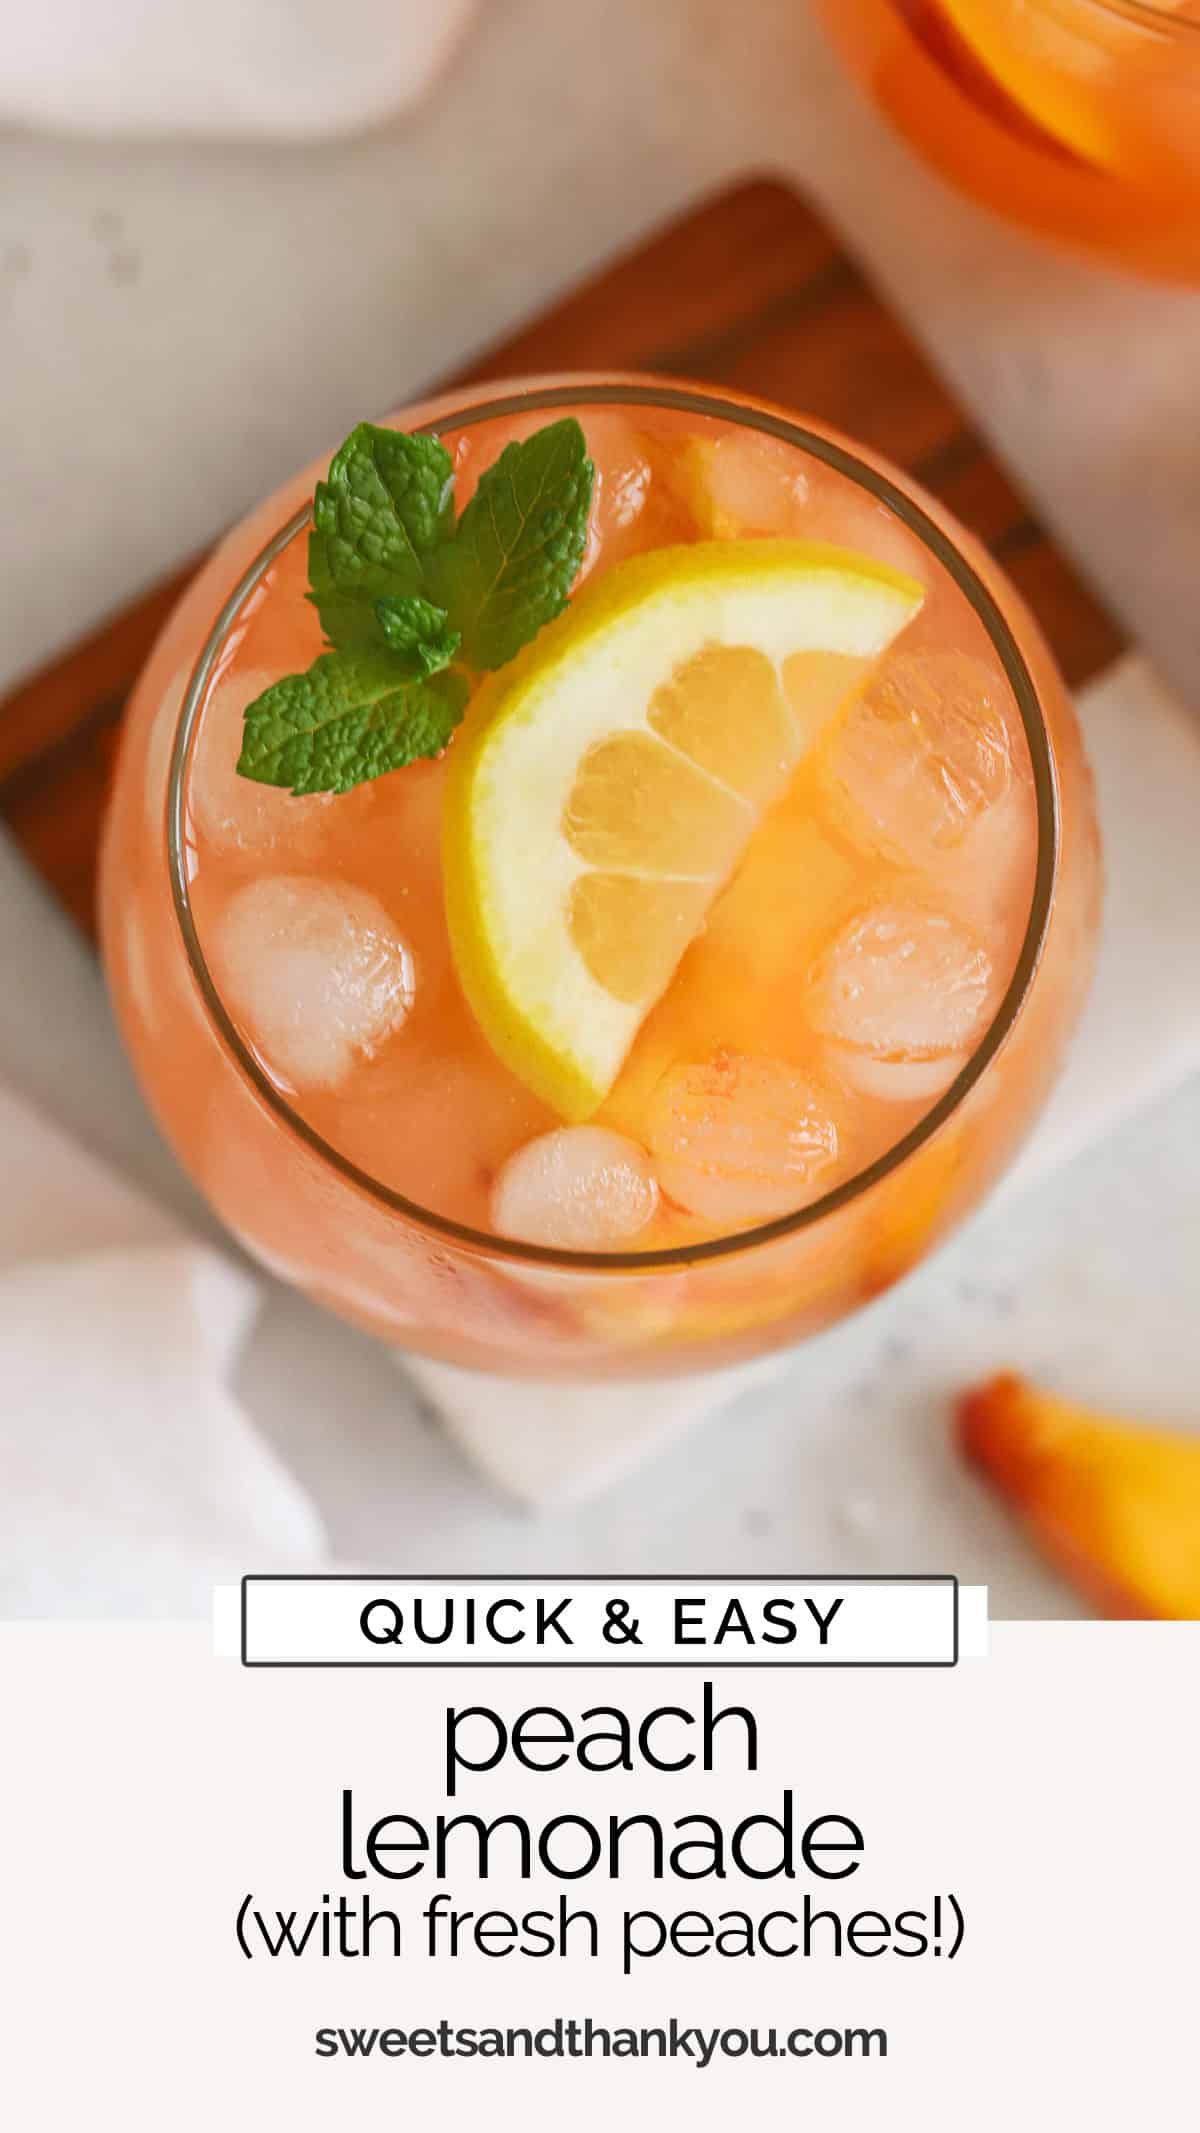 This easy homemade peach lemonade recipe is made with fresh (or frozen!) peaches and lemon juice to make a light, refreshing summer drink you won't want to miss. / peach lemonade from scratch / peach lemonade without concentrate / peach lemonade with fresh peaches / peach lemonade with frozen peaches / easy peach lemonade recipe / peach mocktail / summer drink / peach flavored lemonade recipe 